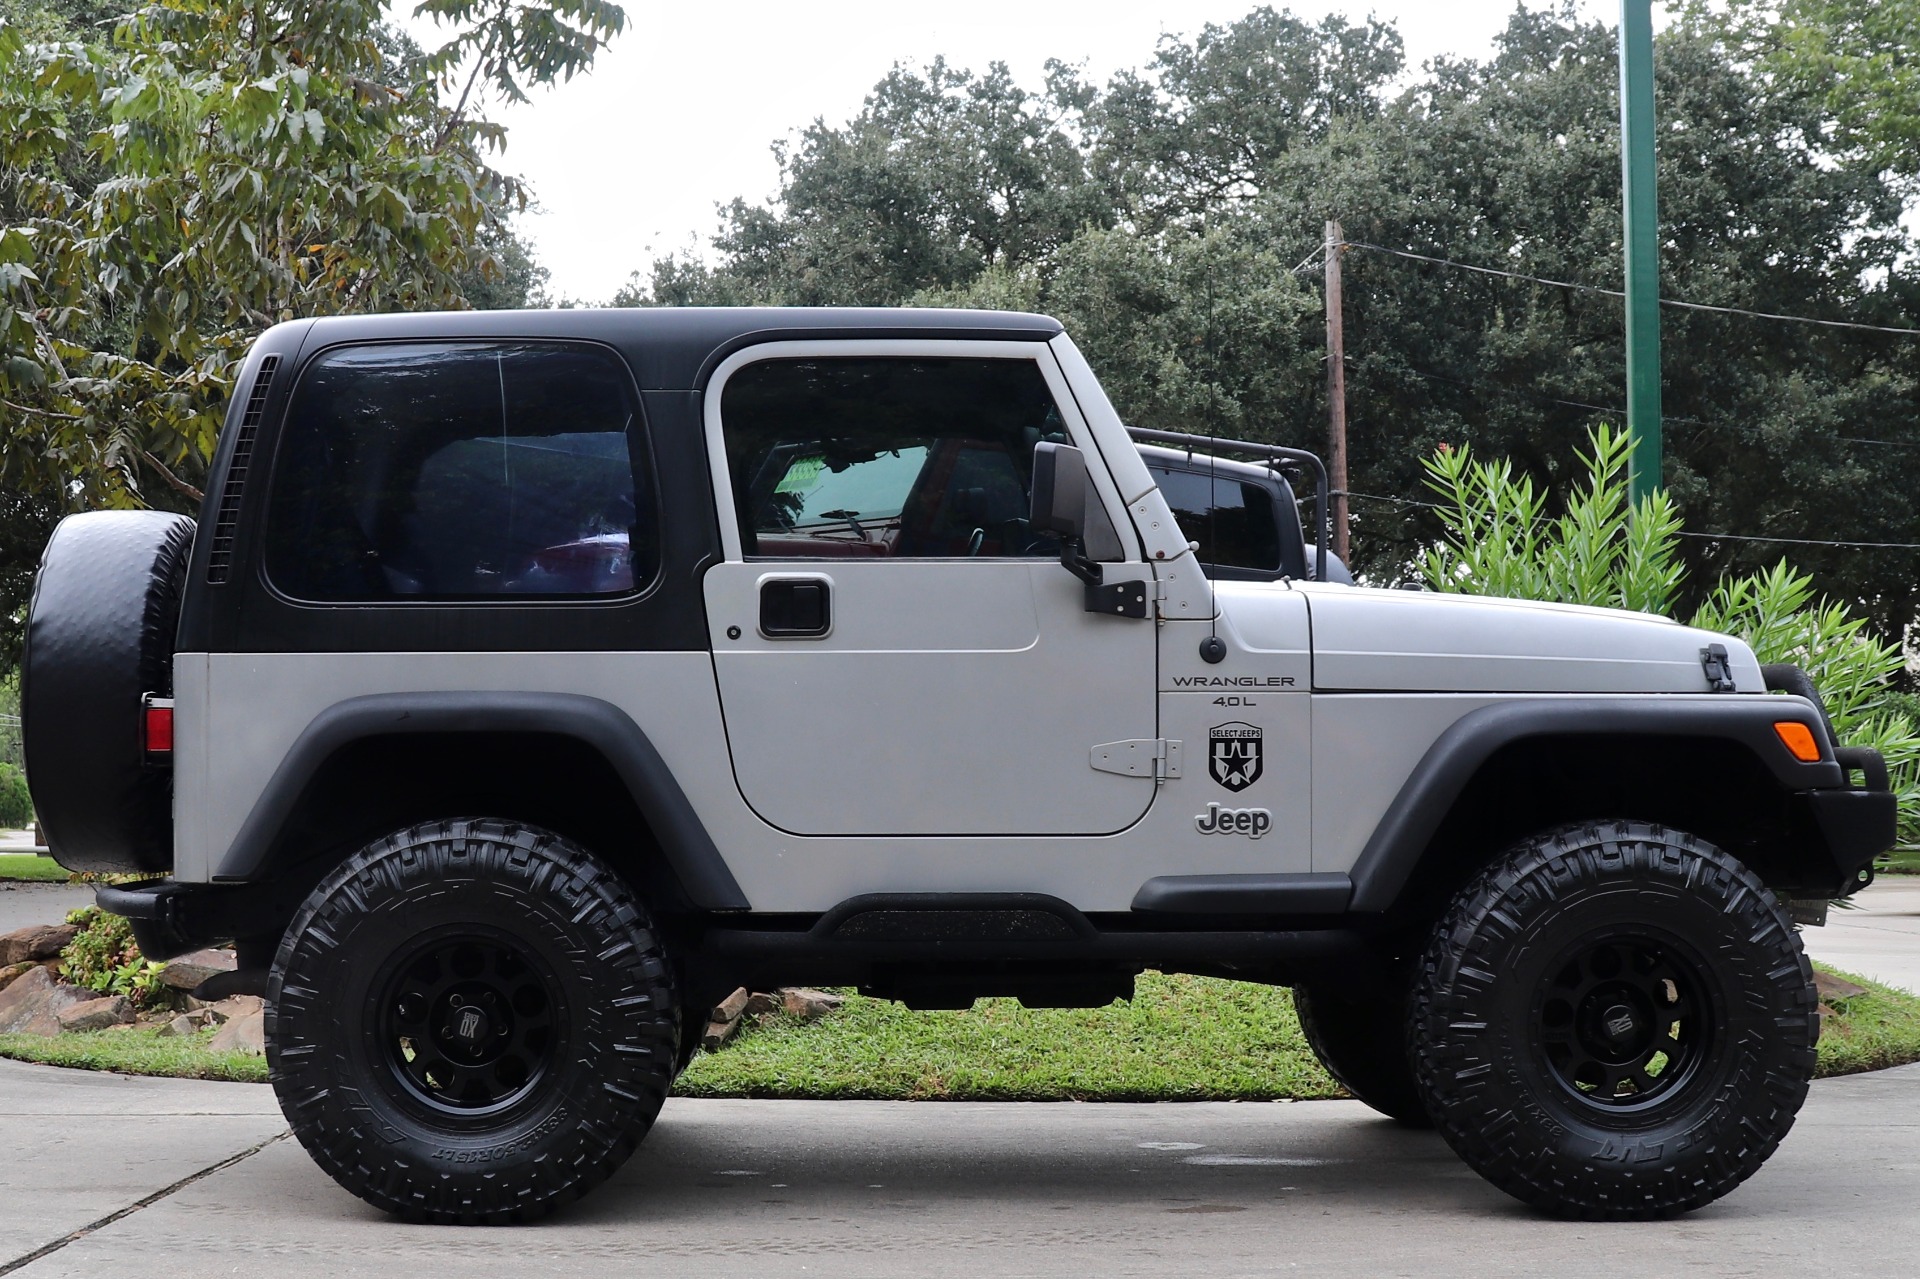 Used 2000 Jeep Wrangler Sport For Sale ($21,995) | Select Jeeps Inc. Stock  #766806